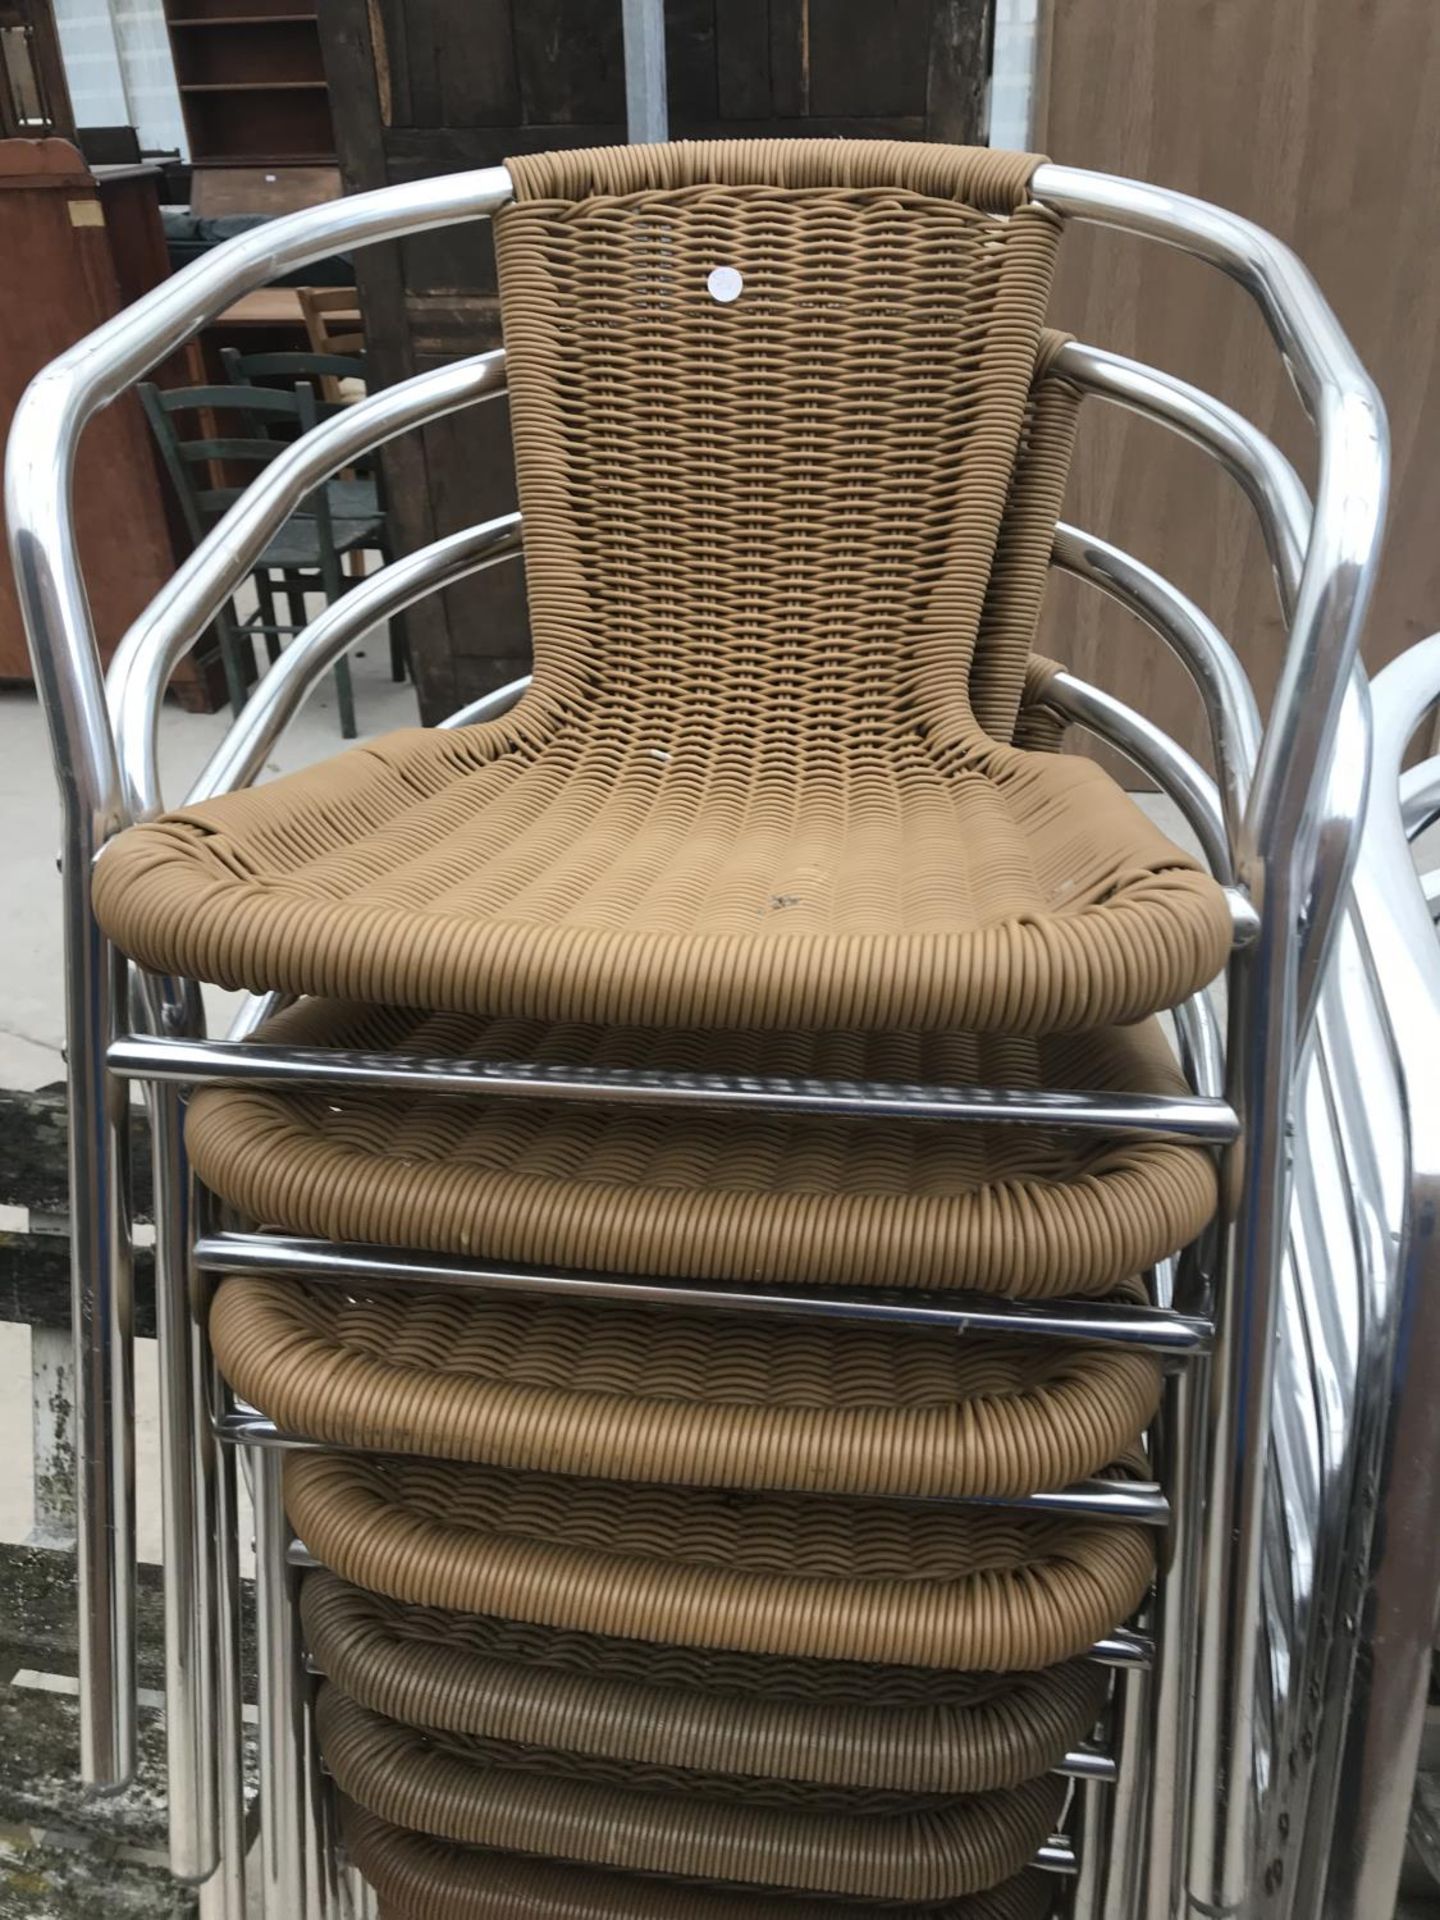 TWENTY TWO CHROME BISTRO CHAIRS SOME WITH WOOD AND SOME WITH WOVEN PLASTIC SEATS - Image 4 of 4